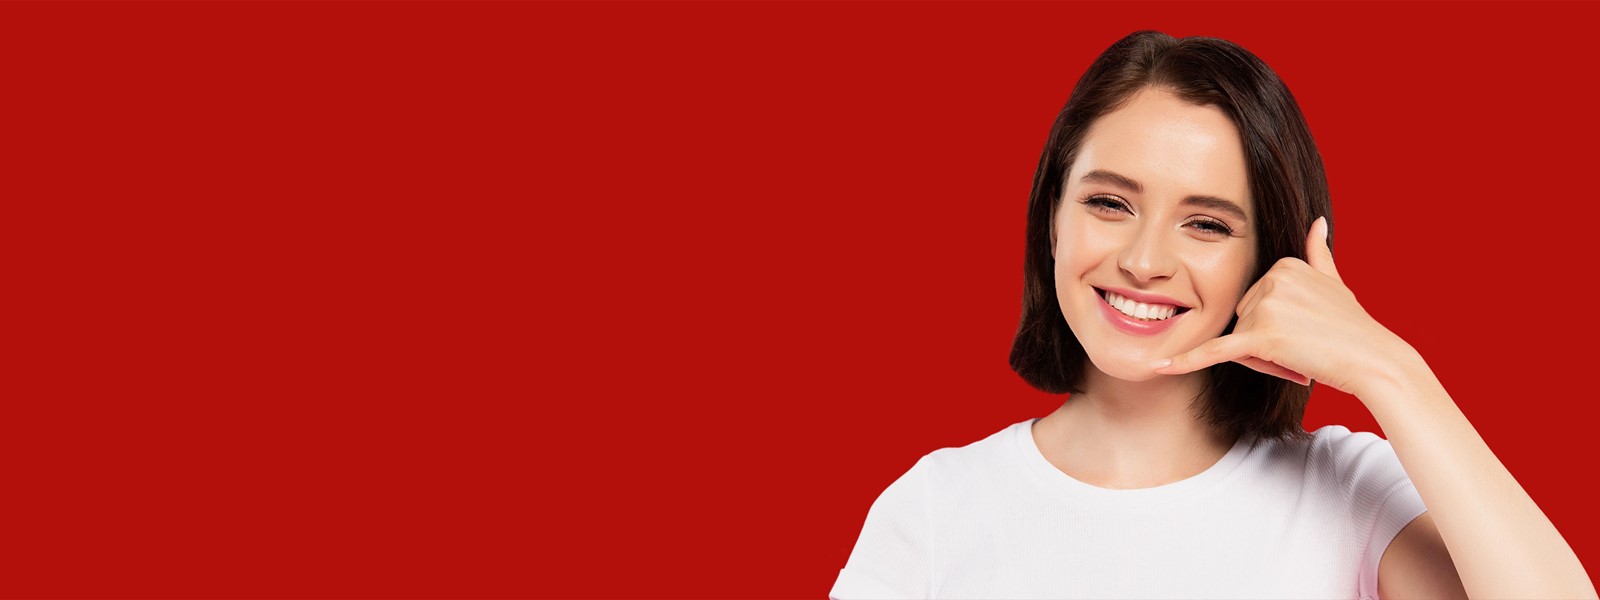 Header photo of a woman smiling making a phone gesture and a red background